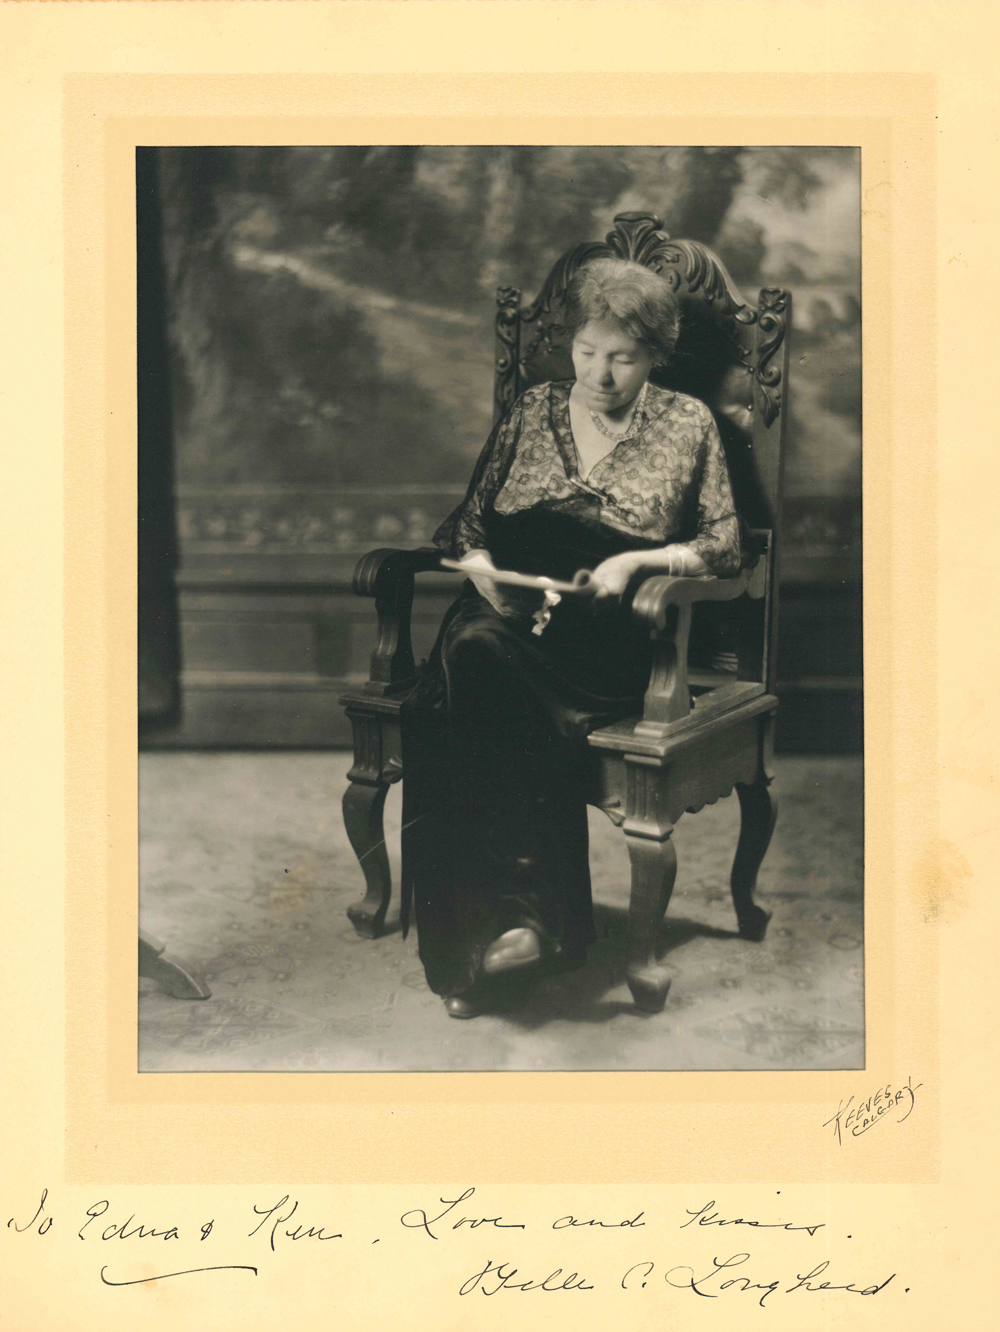 Studio photo of Belle as elderly woman seated in a chair reading.